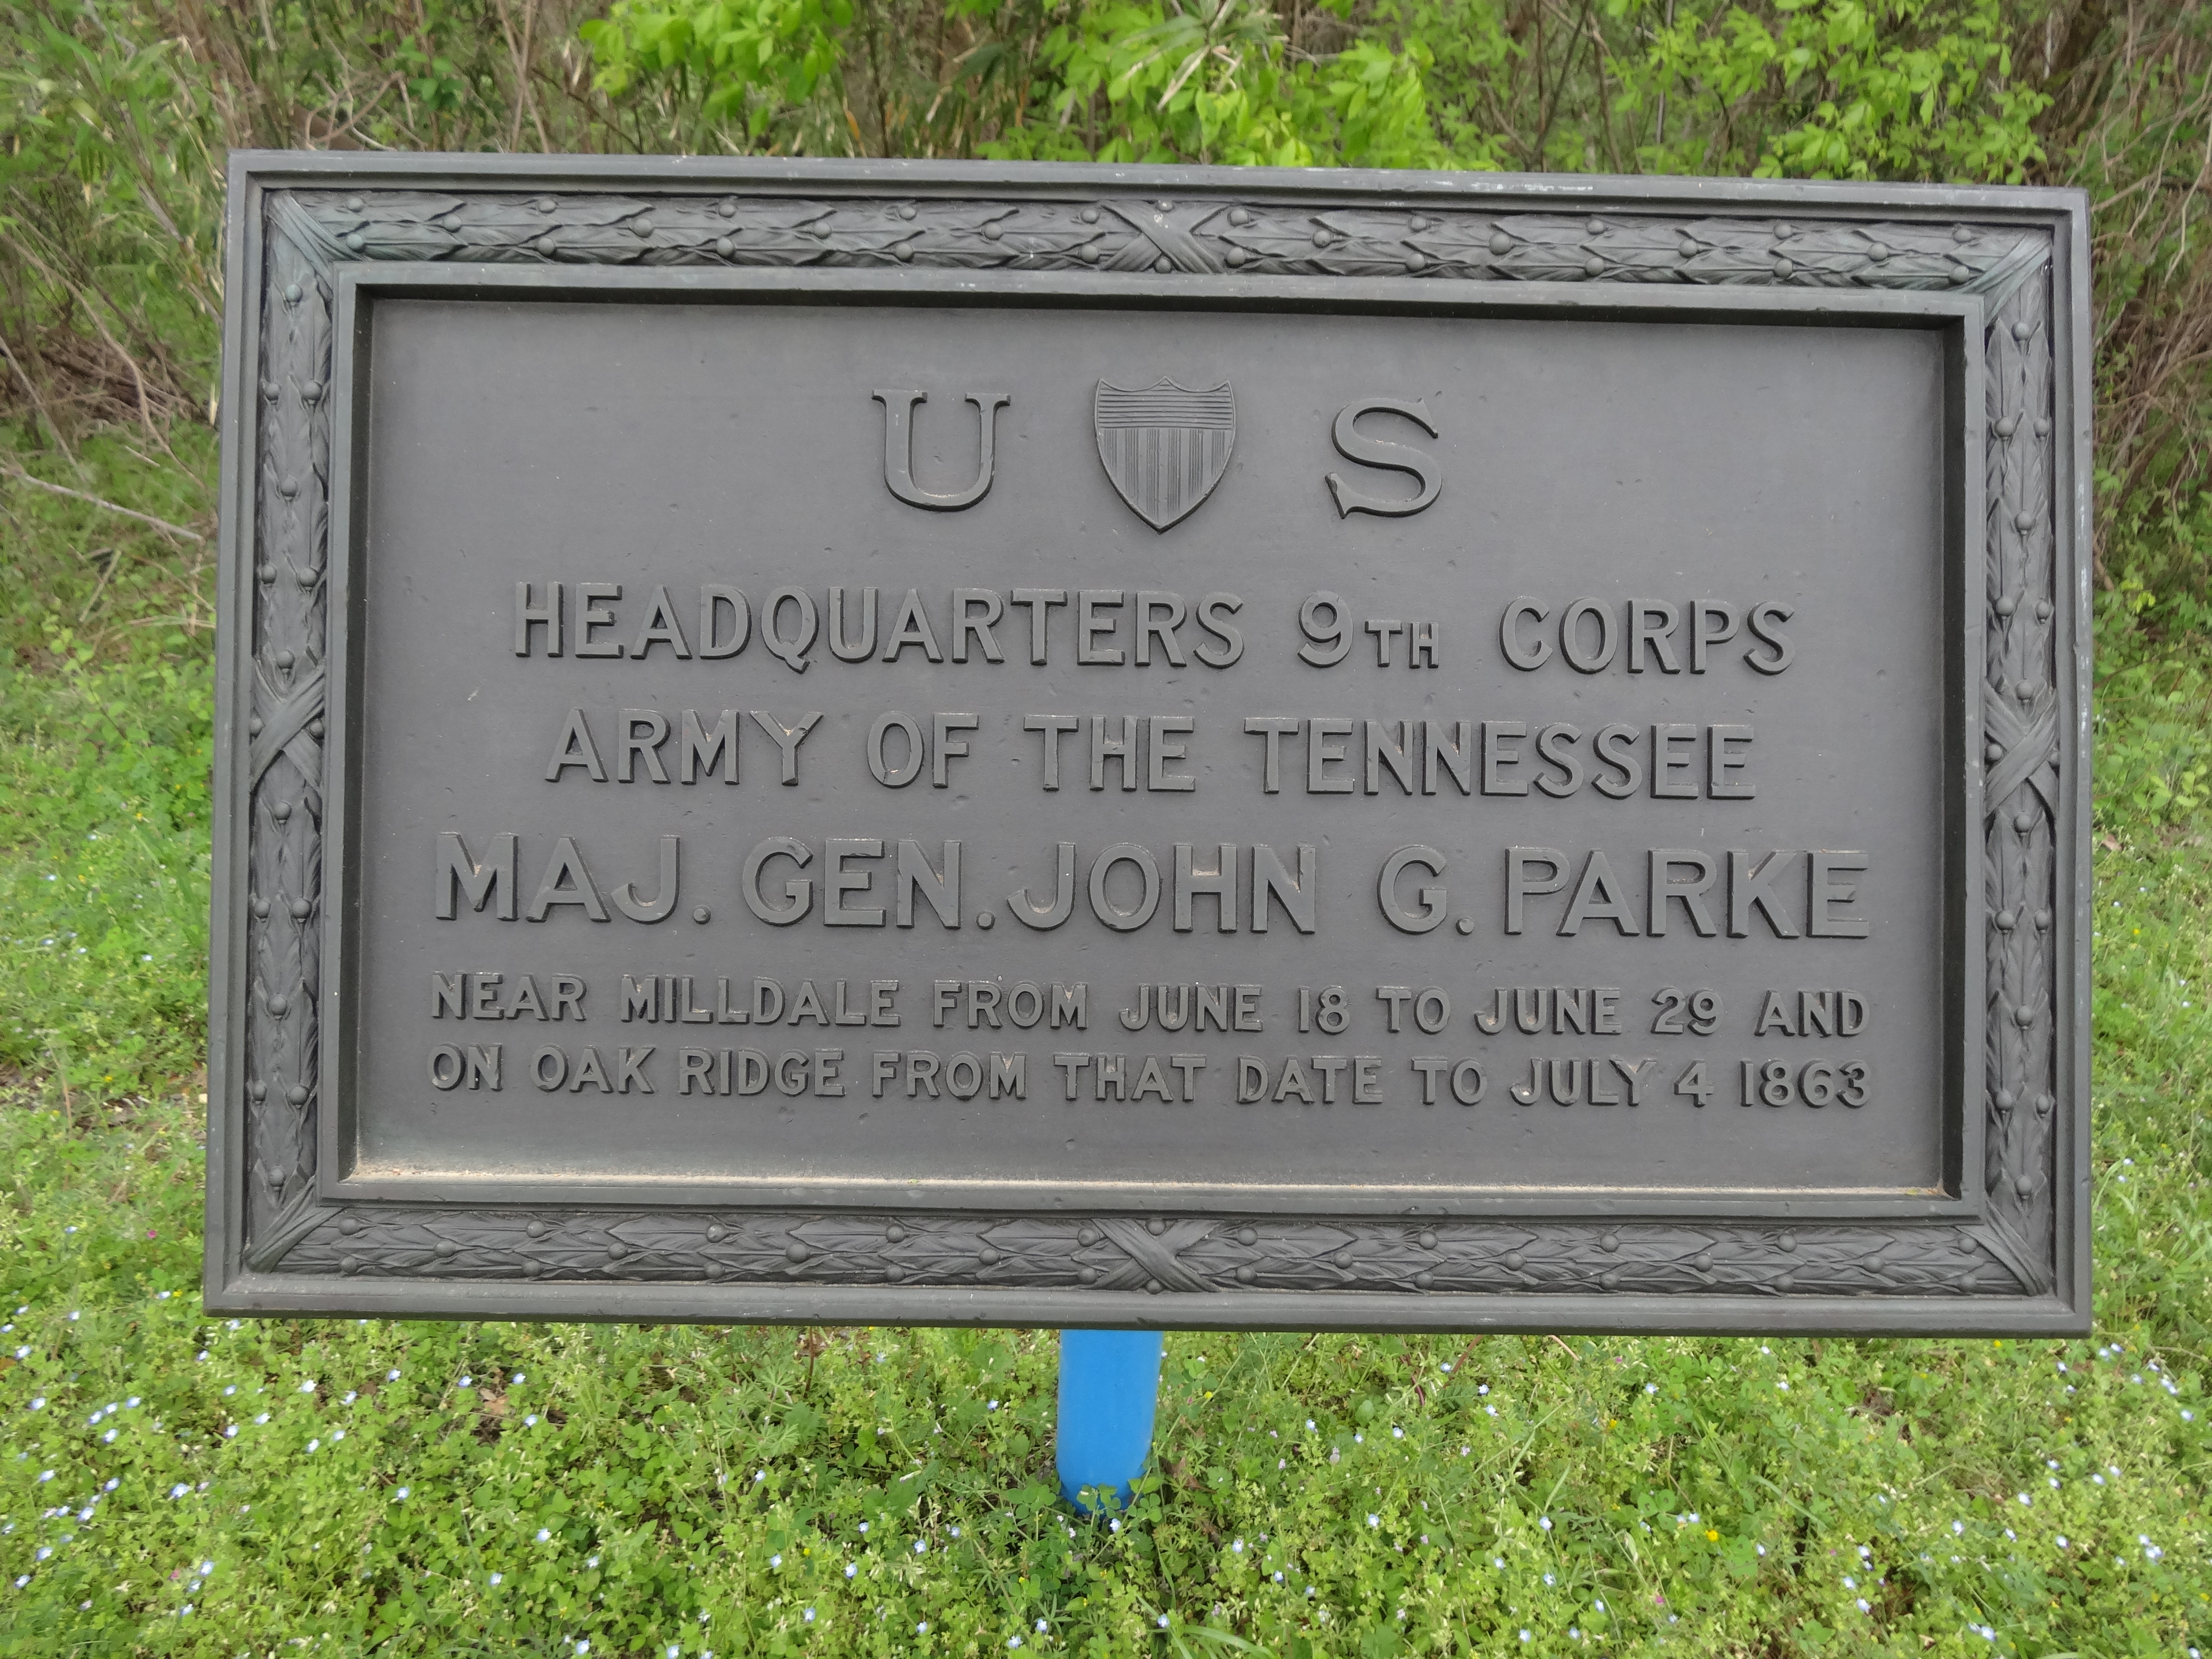 IXth Corps Marker